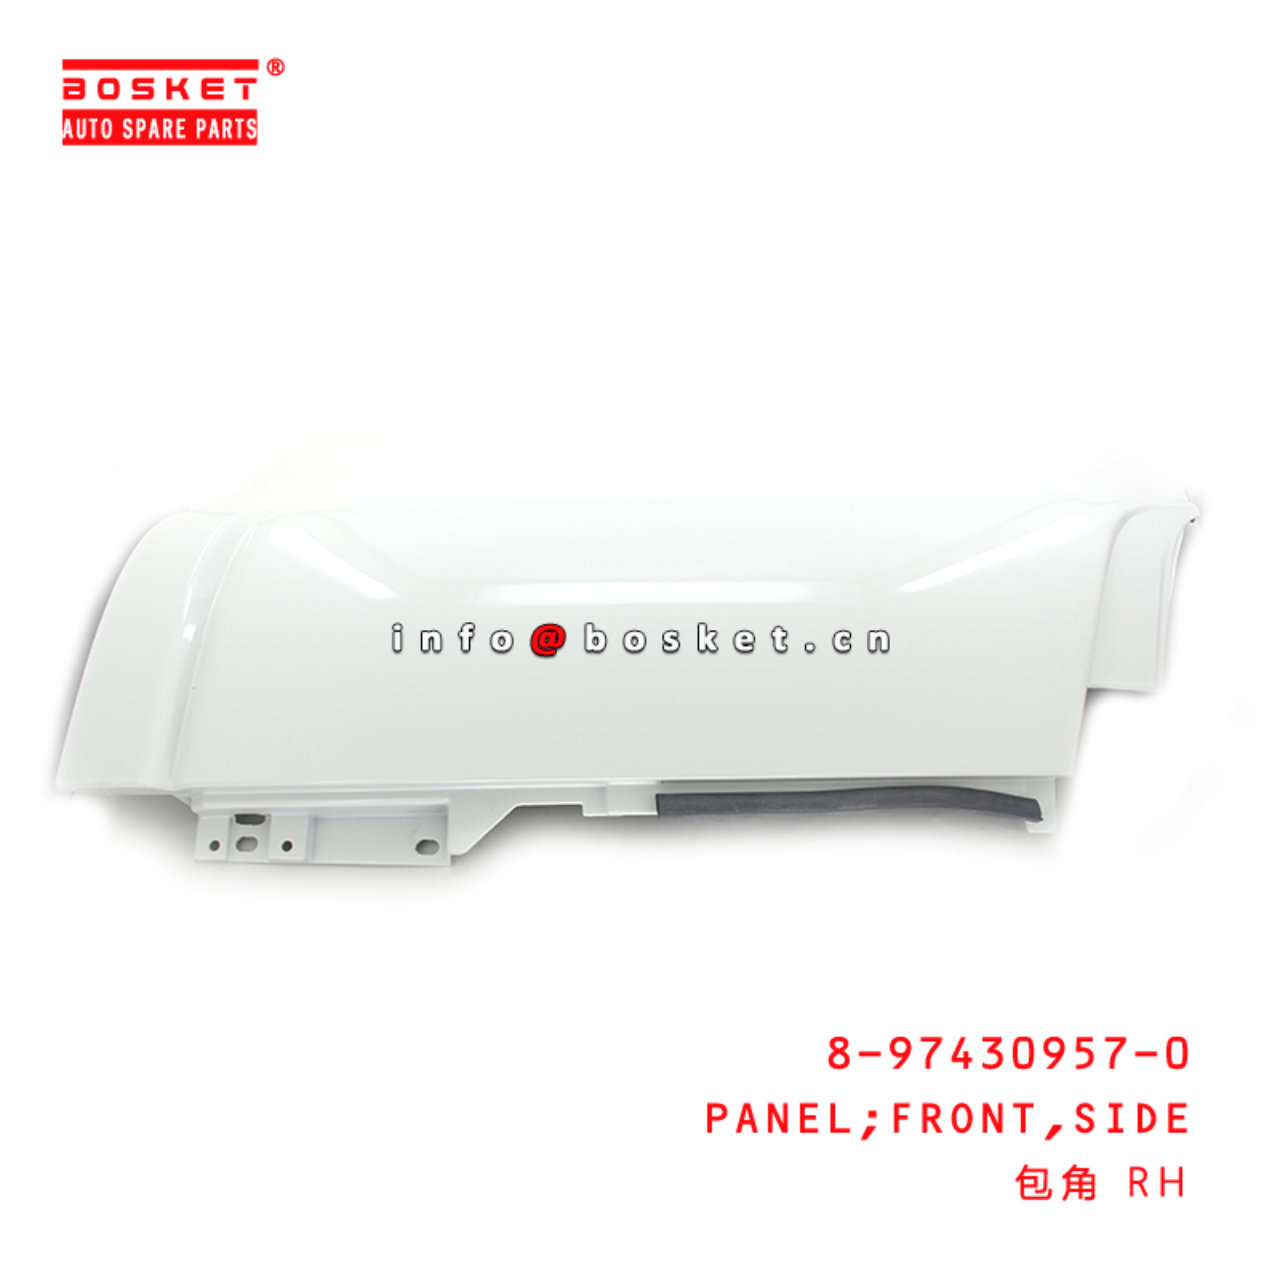 8-97430957-0 Side Front Panel 8974309570 Suitable for ISUZU VC46 